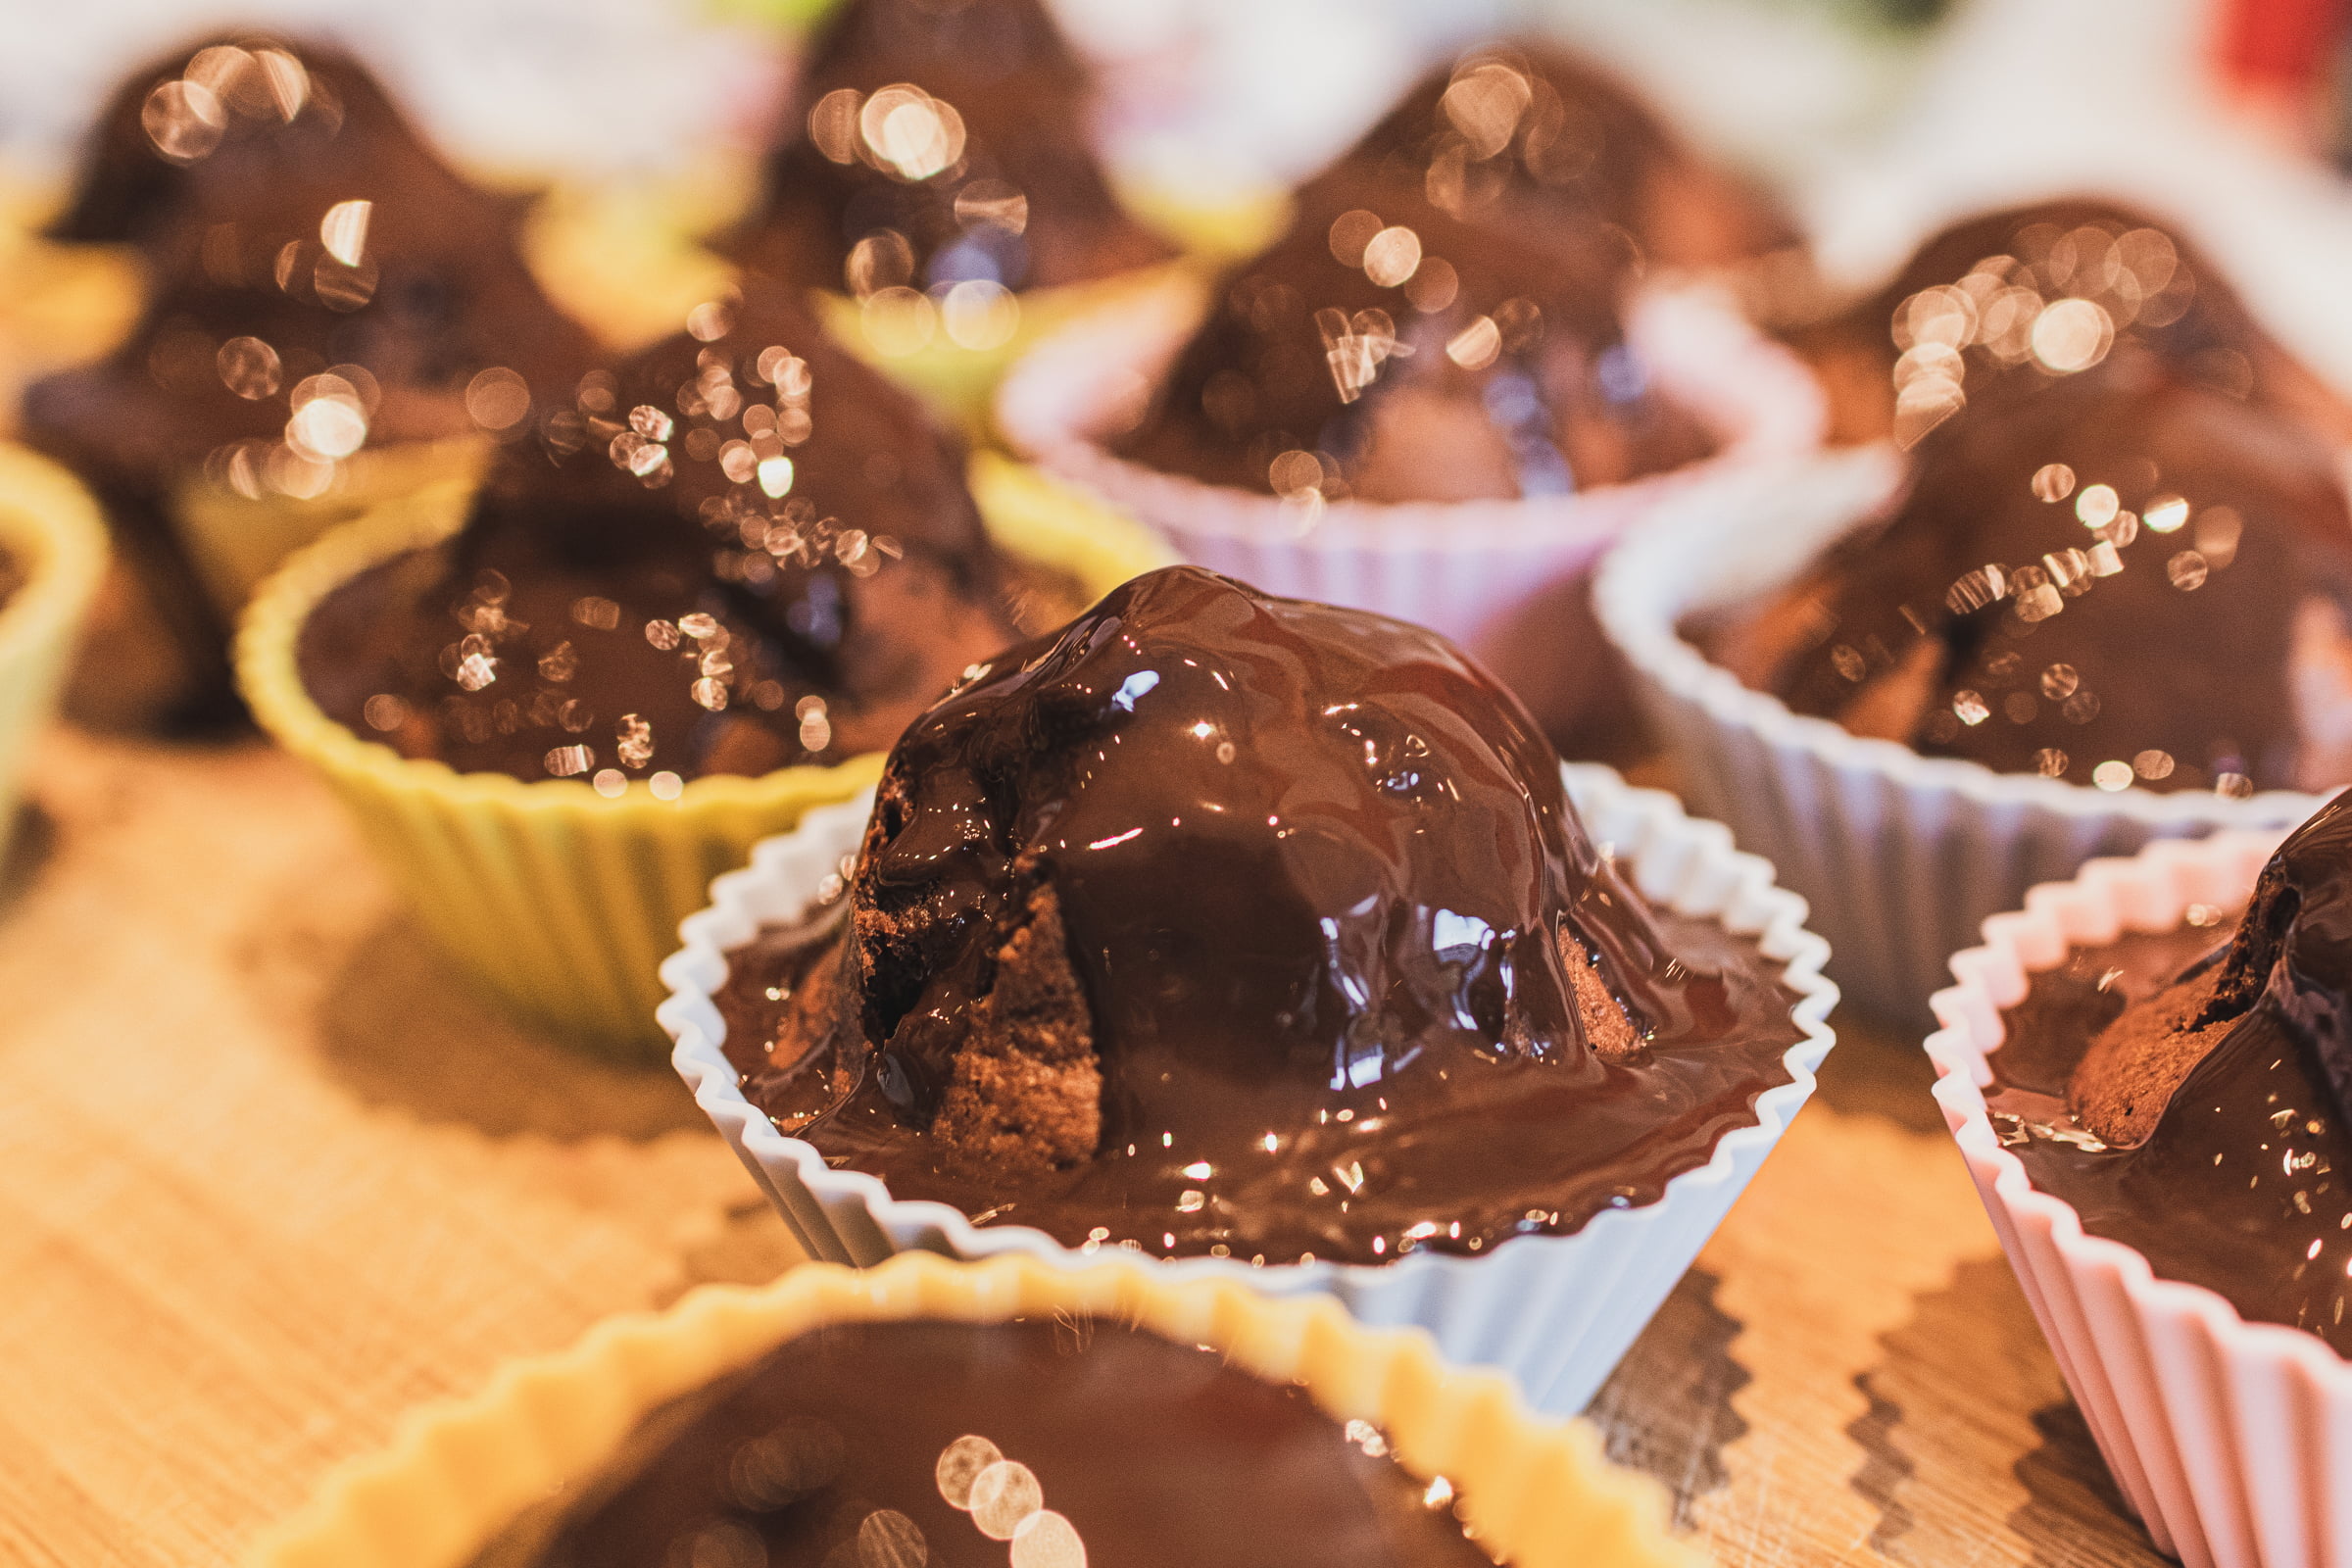 Some muffins glazed with chocolate that's still fluid and sparkling.